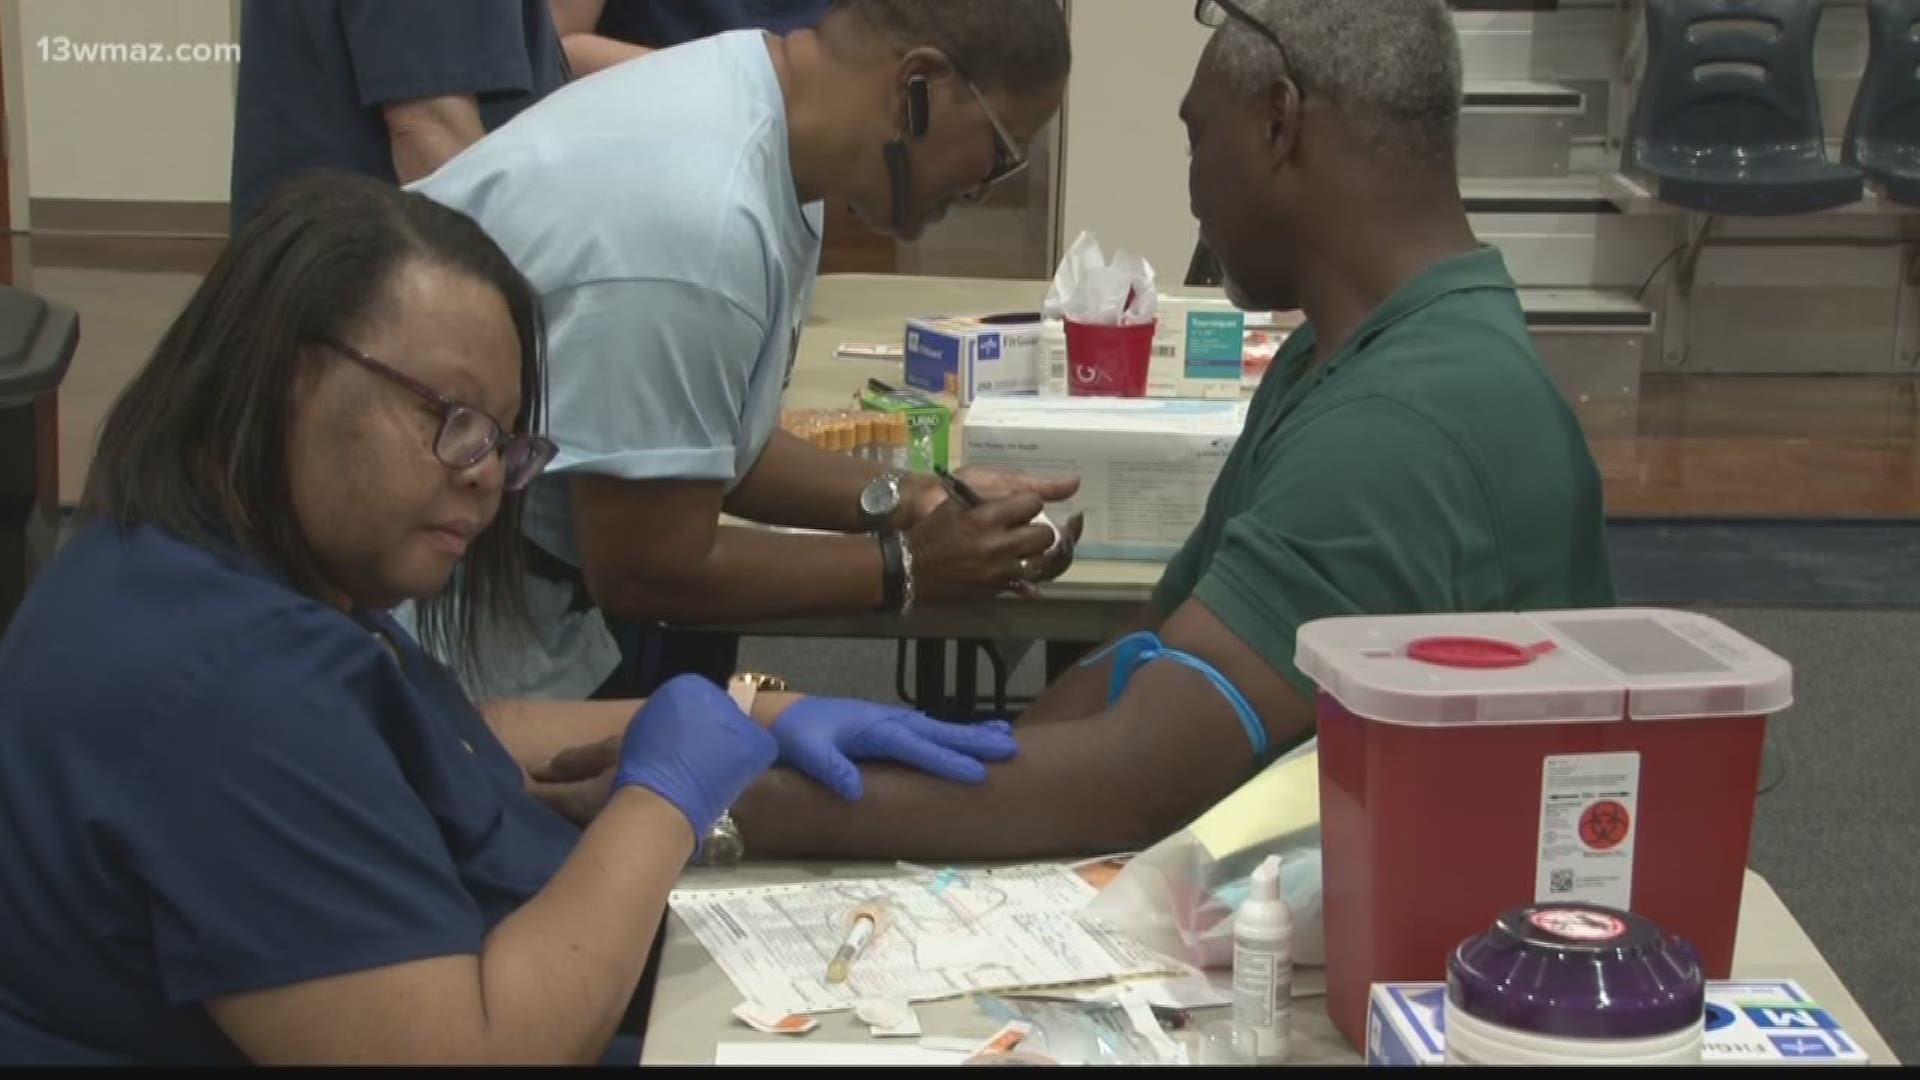 Dozens of men received free health screenings at Central Georgia Technical College in Macon Saturday. The 7th annual Iron Men's Health Fair was put on by Navicent Health, the health department, and other local healthcare partners.